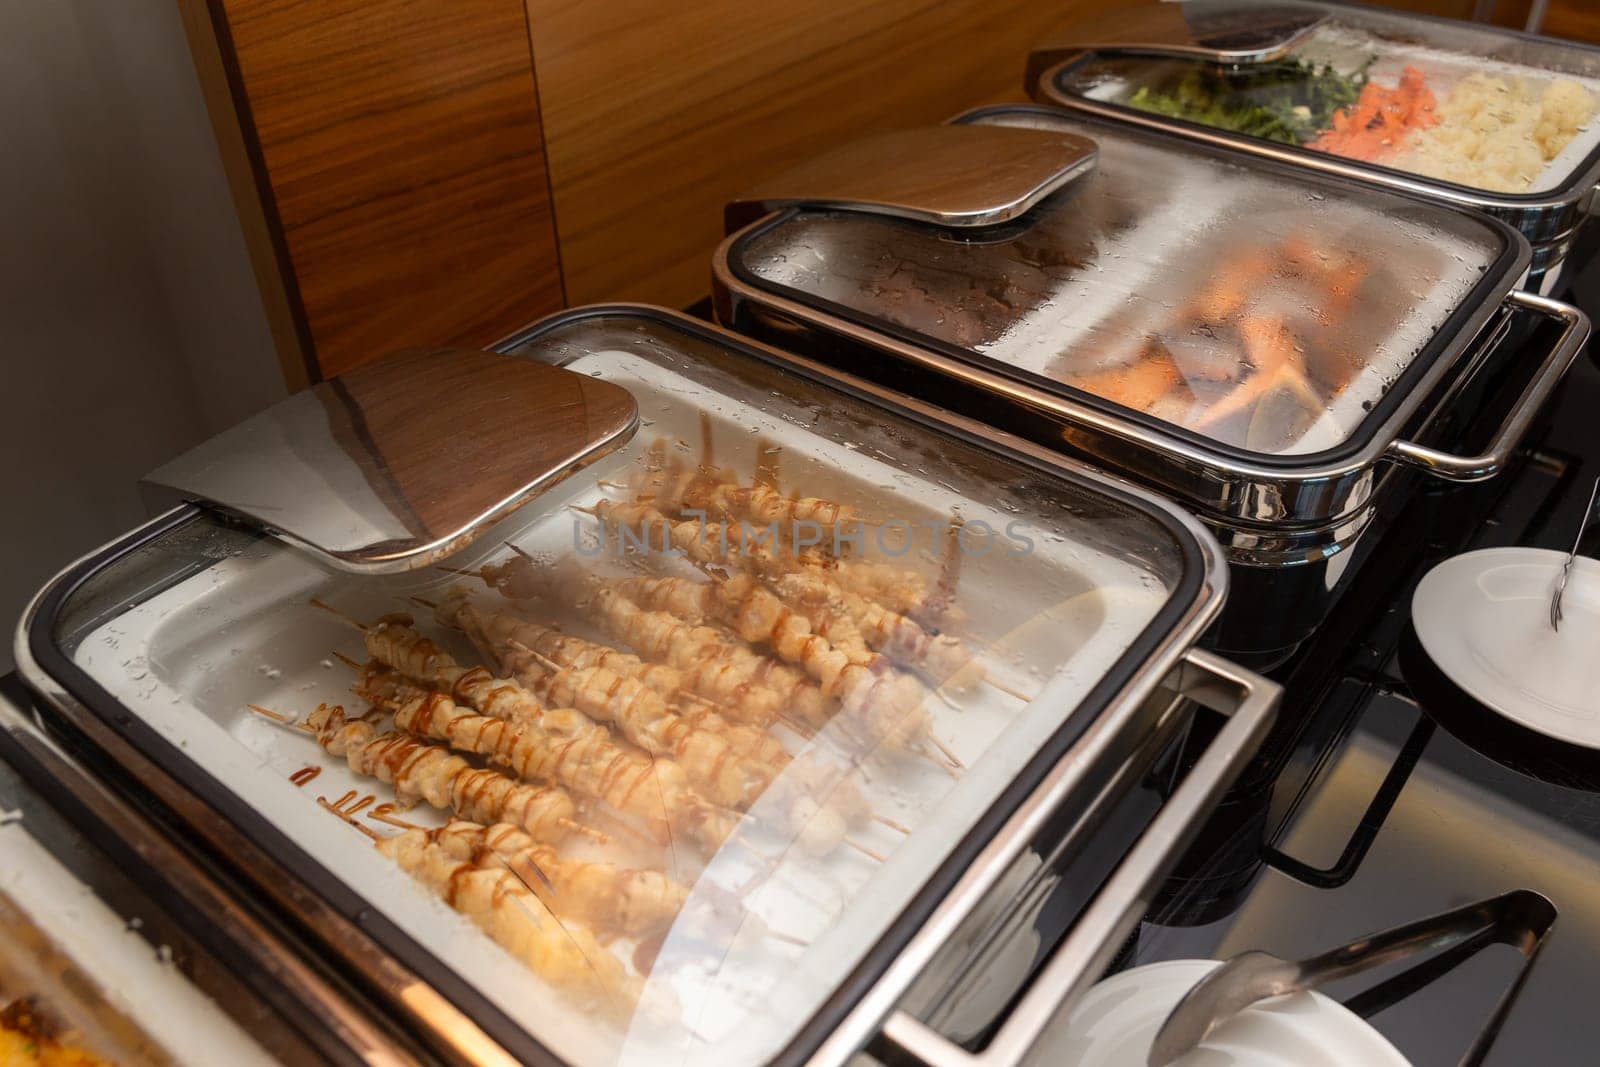 Fried meat on skewers and other appetizers in a food warmer on a buffet table in a hotel restaurant. Table with dishware and shiny marmites waiting for guests.